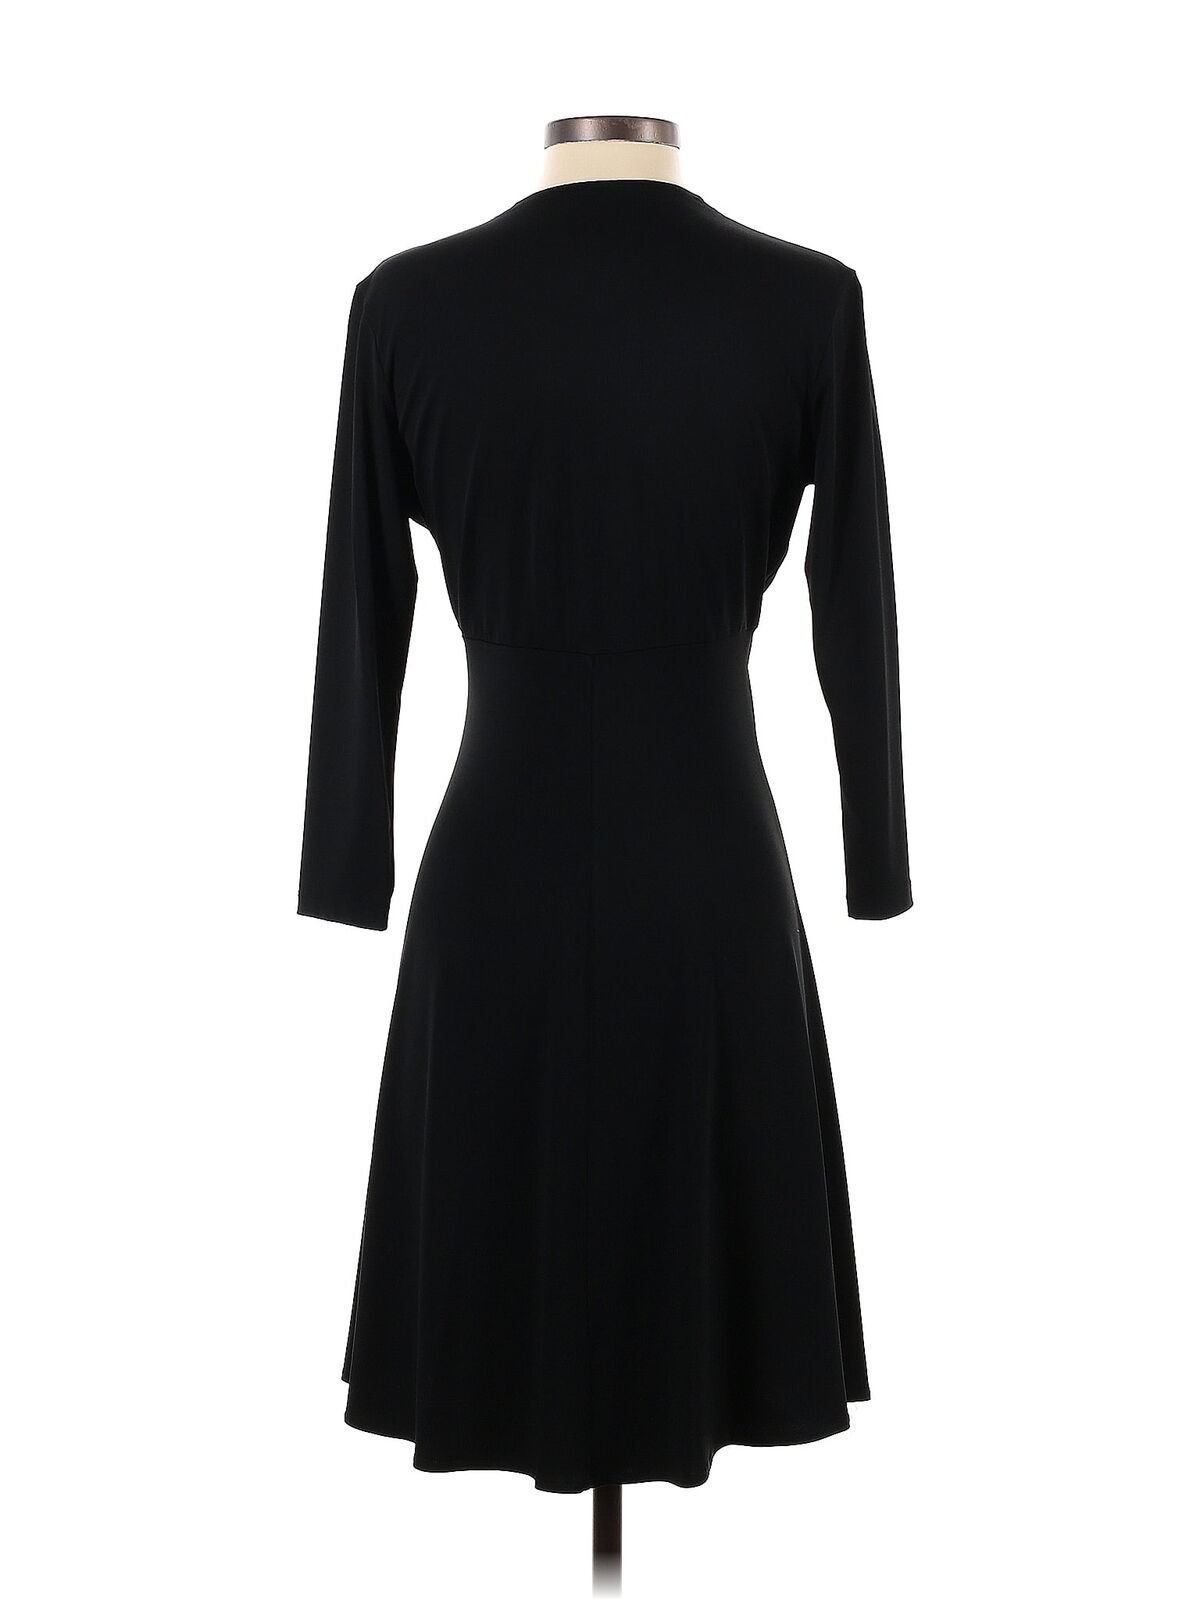 Unbranded Women Black Casual Dress S - image 2